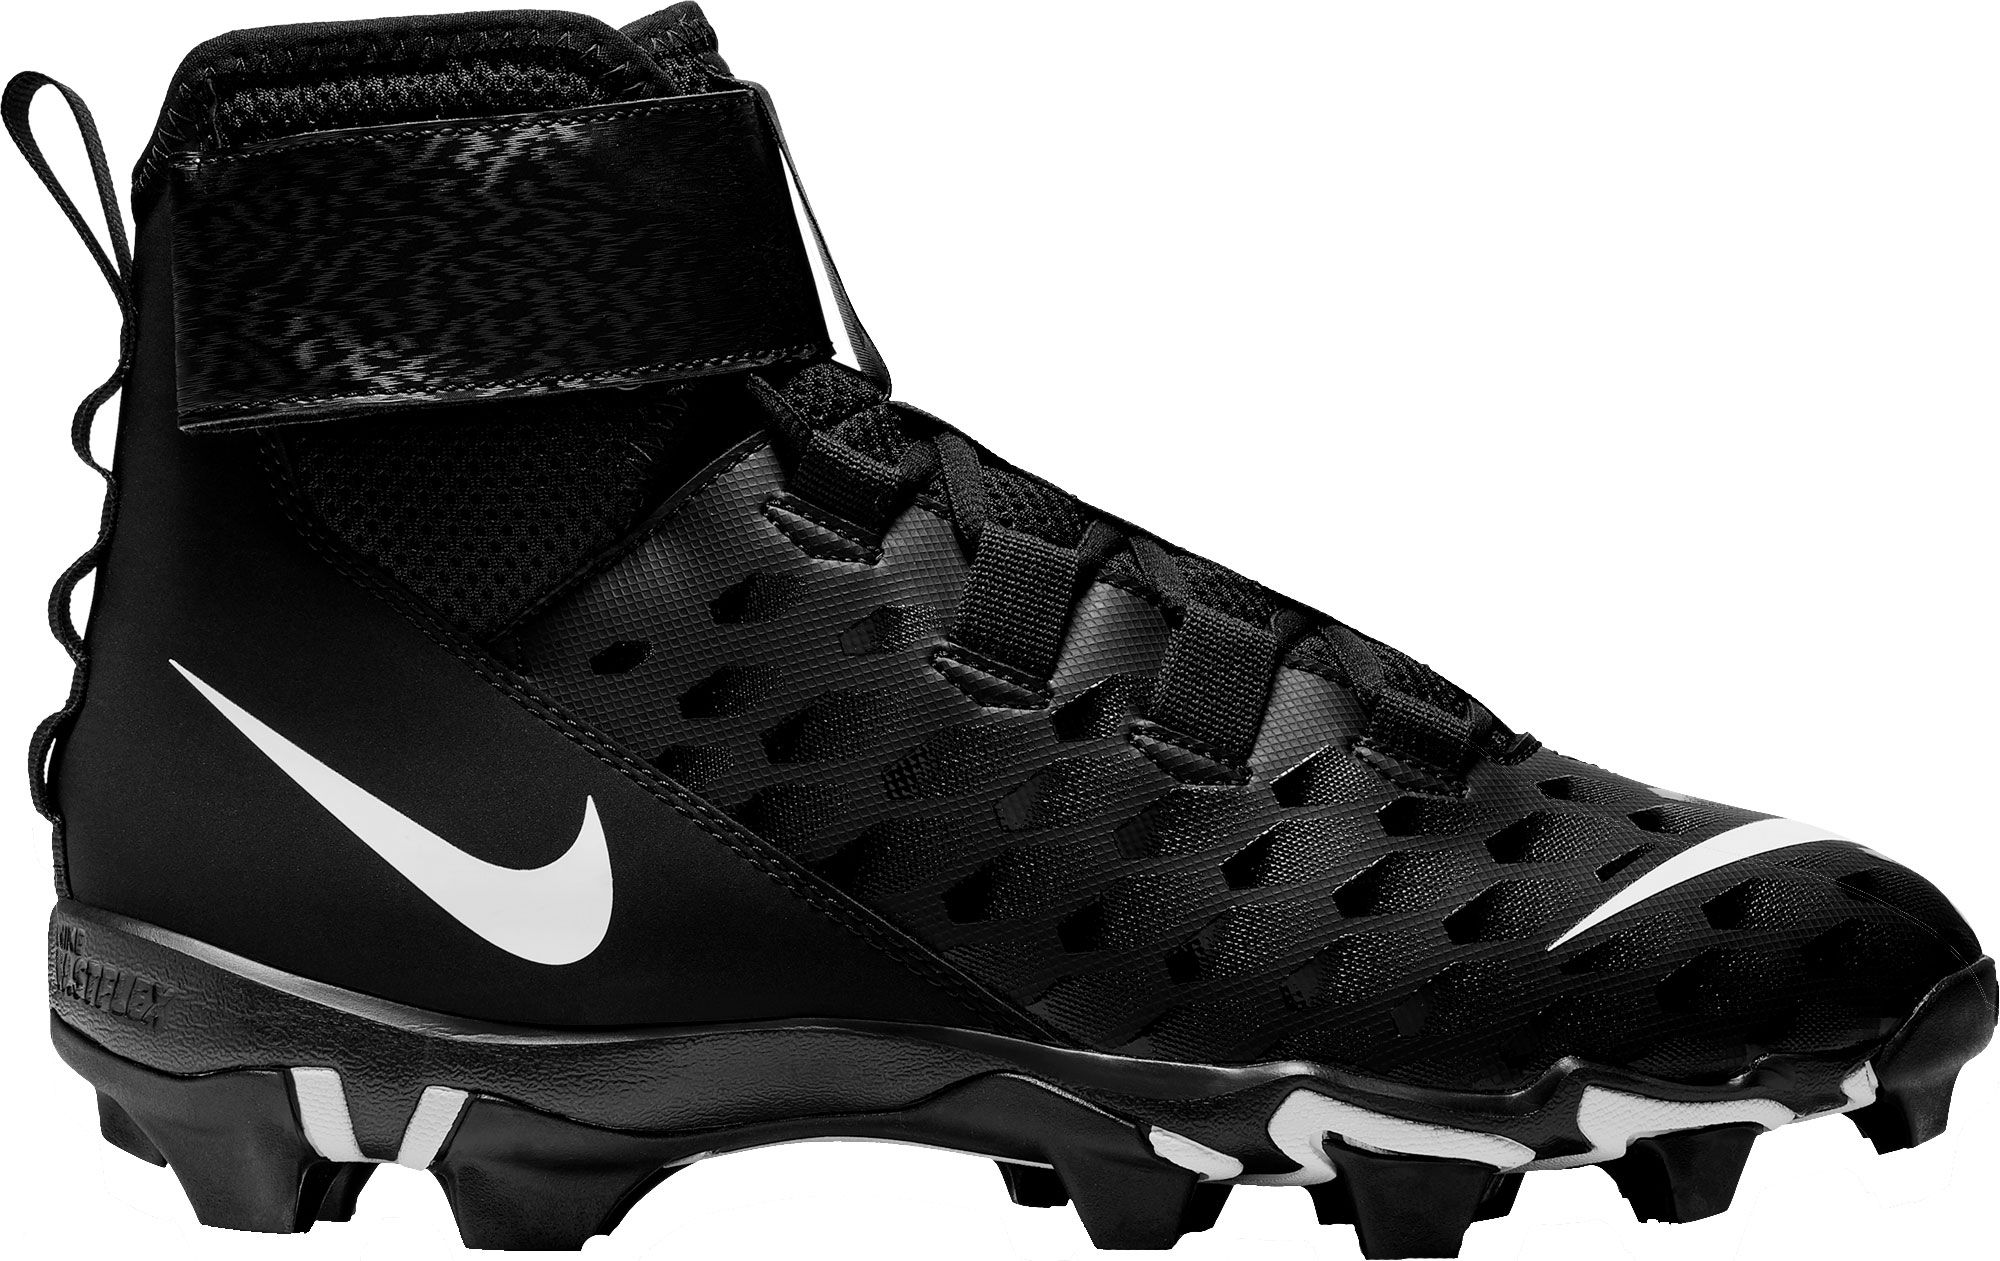 size 8.5 football cleats